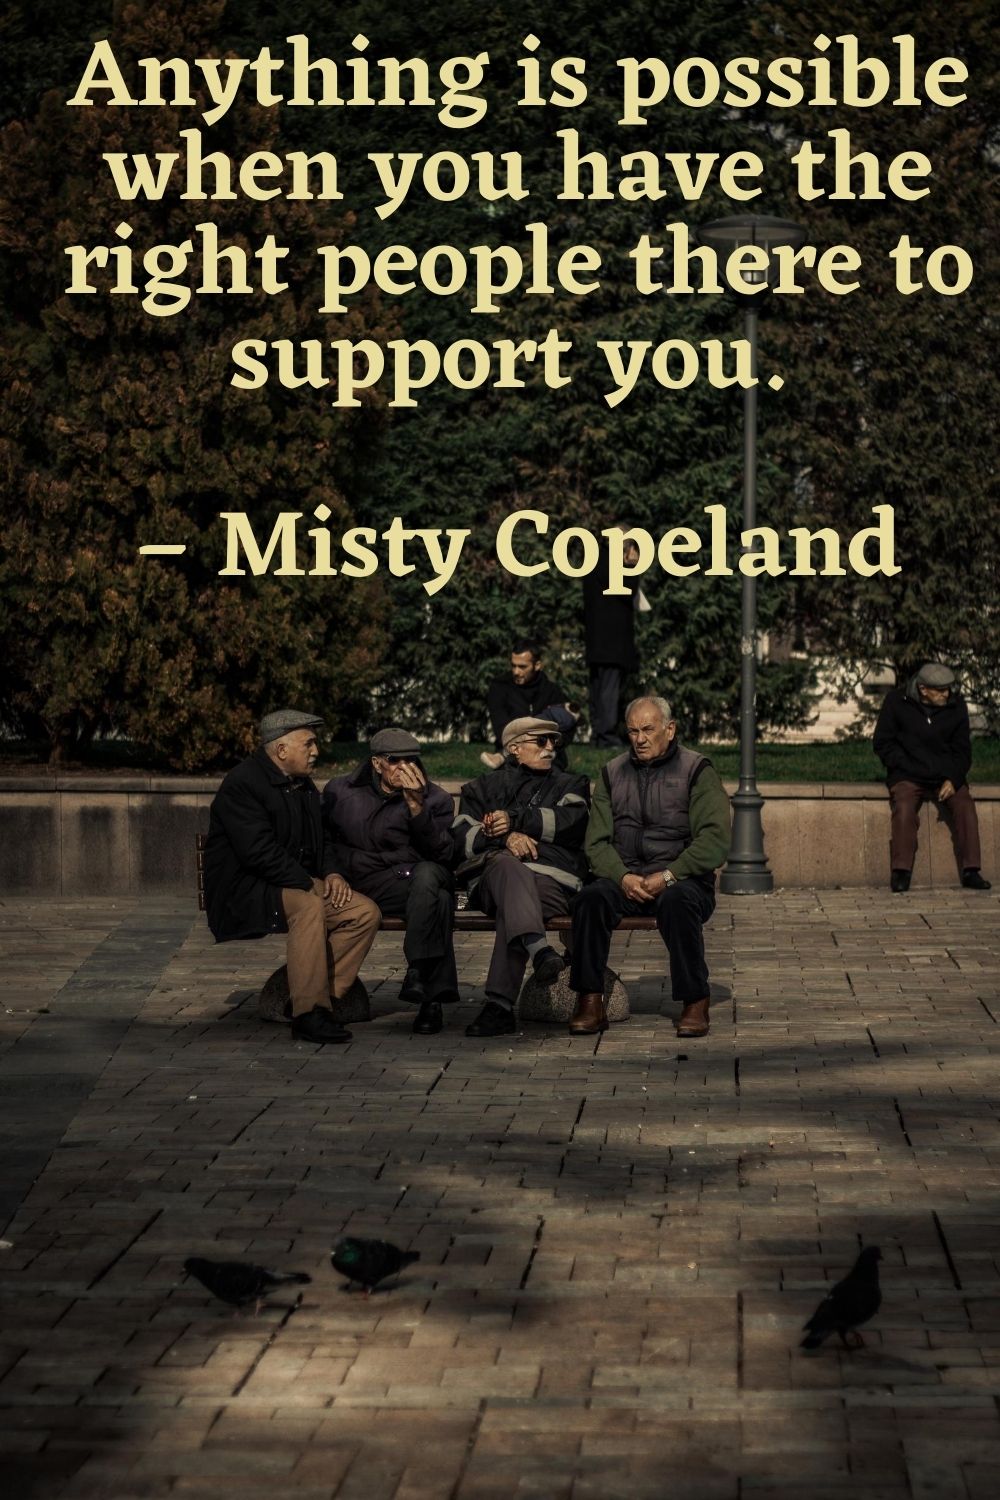 Anything is possible when you have the right people there to support you. – Misty Copeland